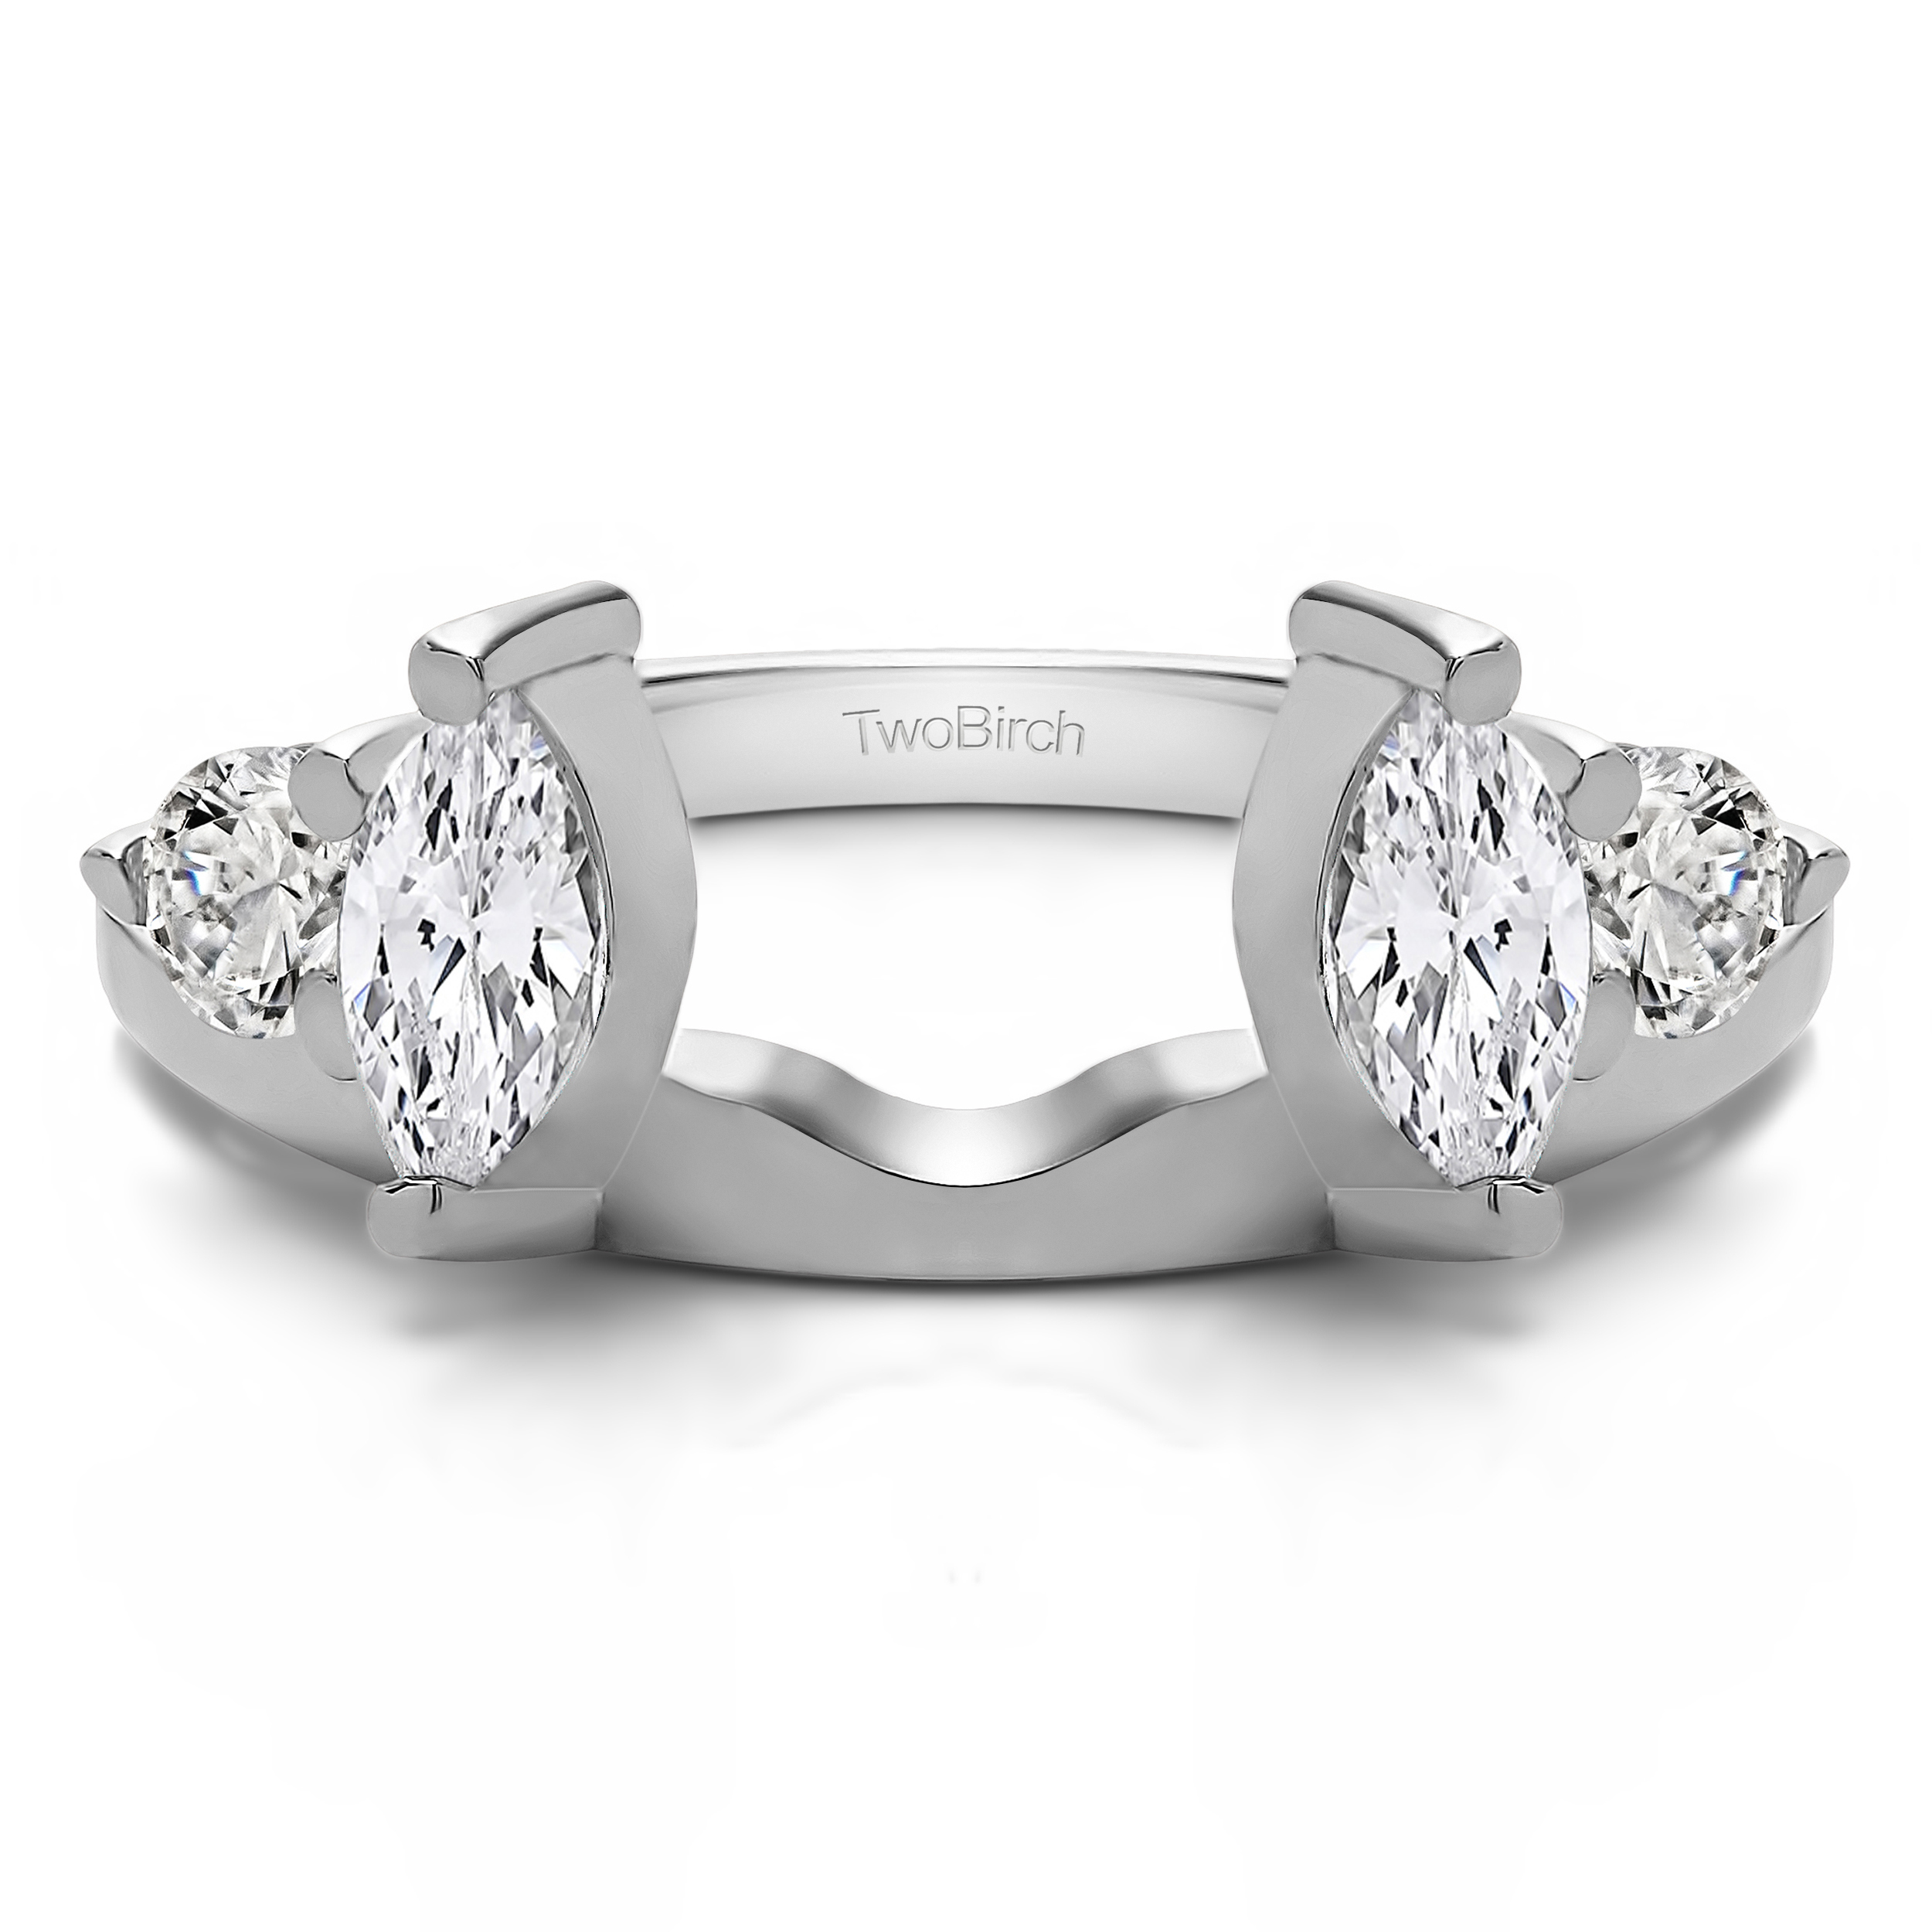 TwoBirch Delicate Ring Wrap Enhancer in Sterling Silver with Cubic Zirconia (0.5 CT)